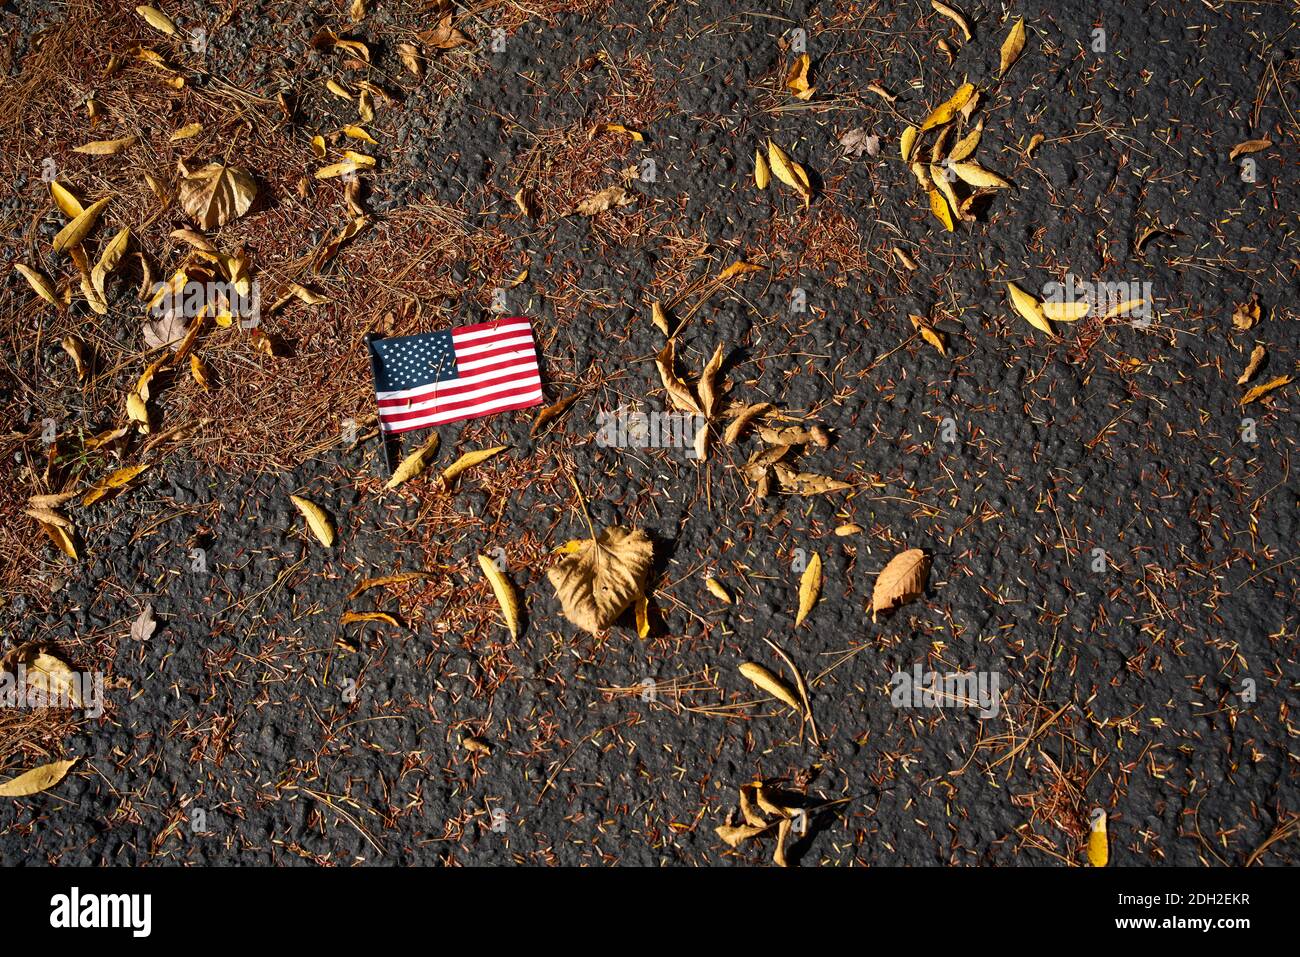 Lost American flag fallen on pavement in-between leafs Stock Photo